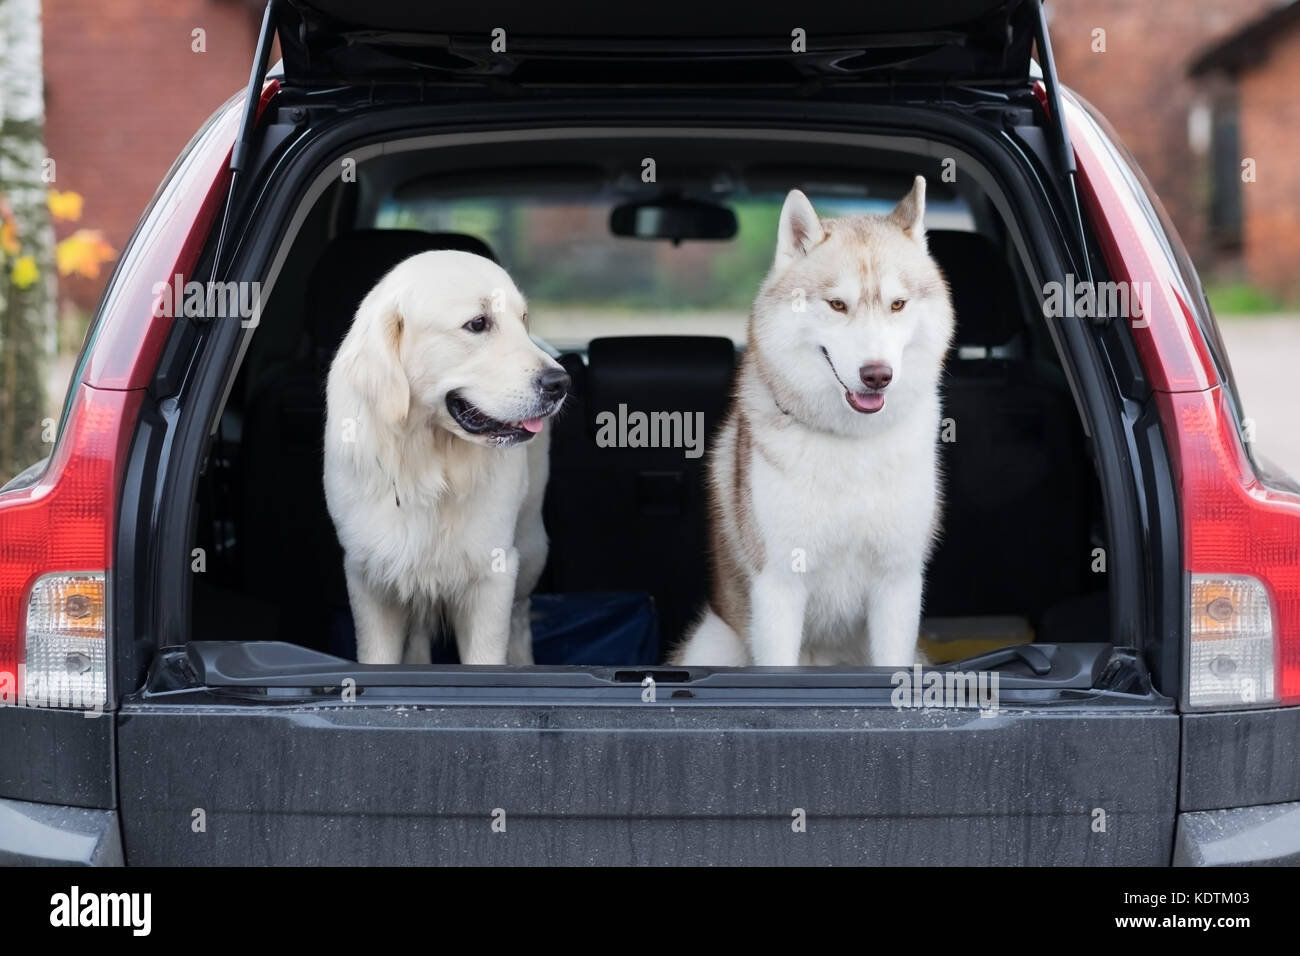 Domestic dog sitting in the car trunk. Preparing for a trip home after walking in park Stock Photo